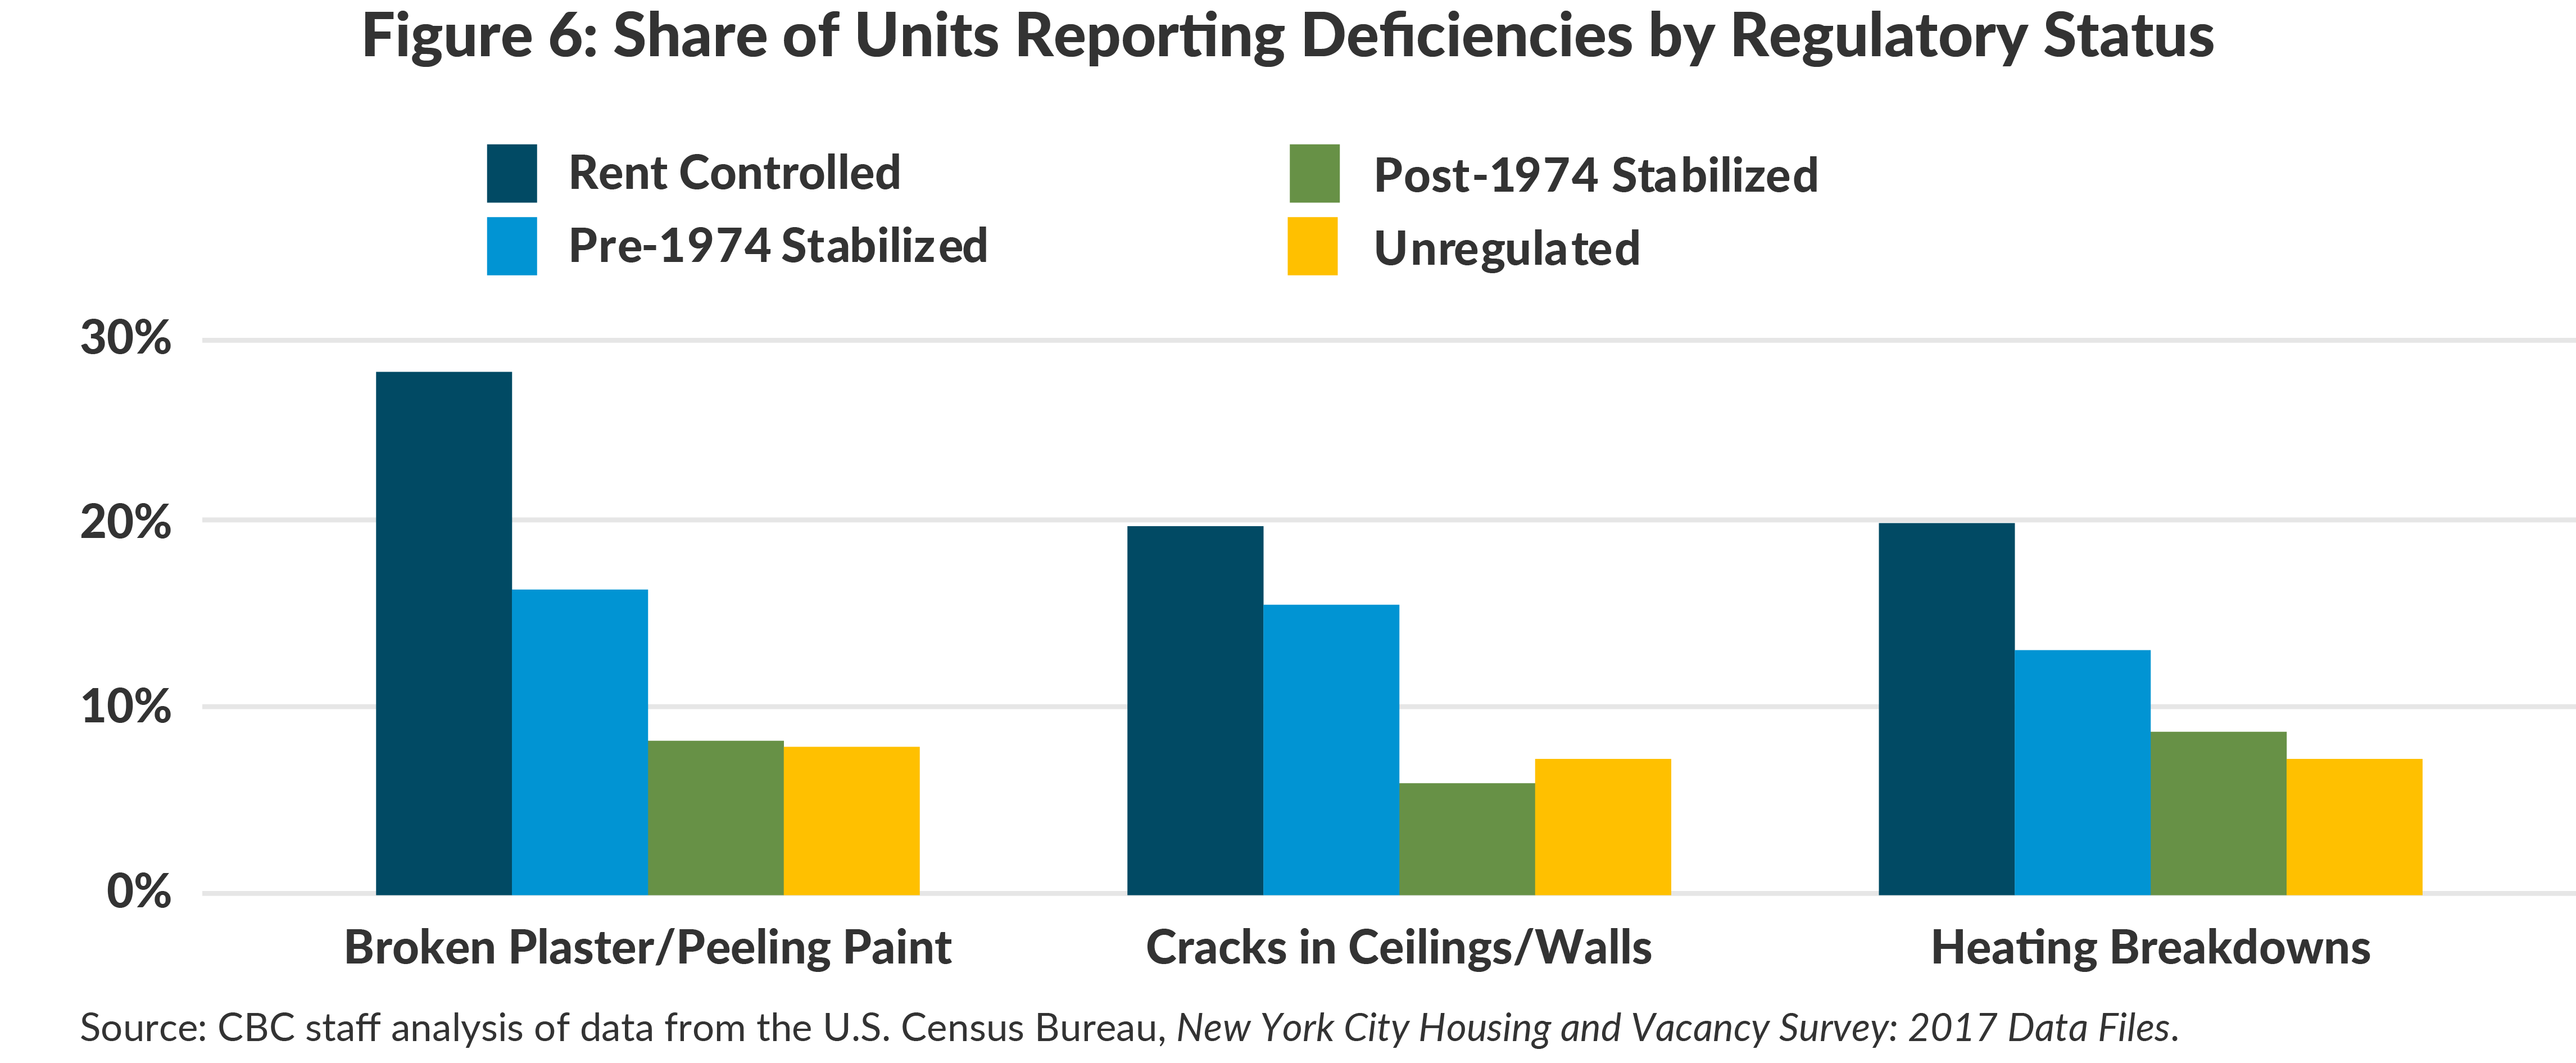 Figure 6: Share of Units Reporting Deficiencies by Regulatory Status